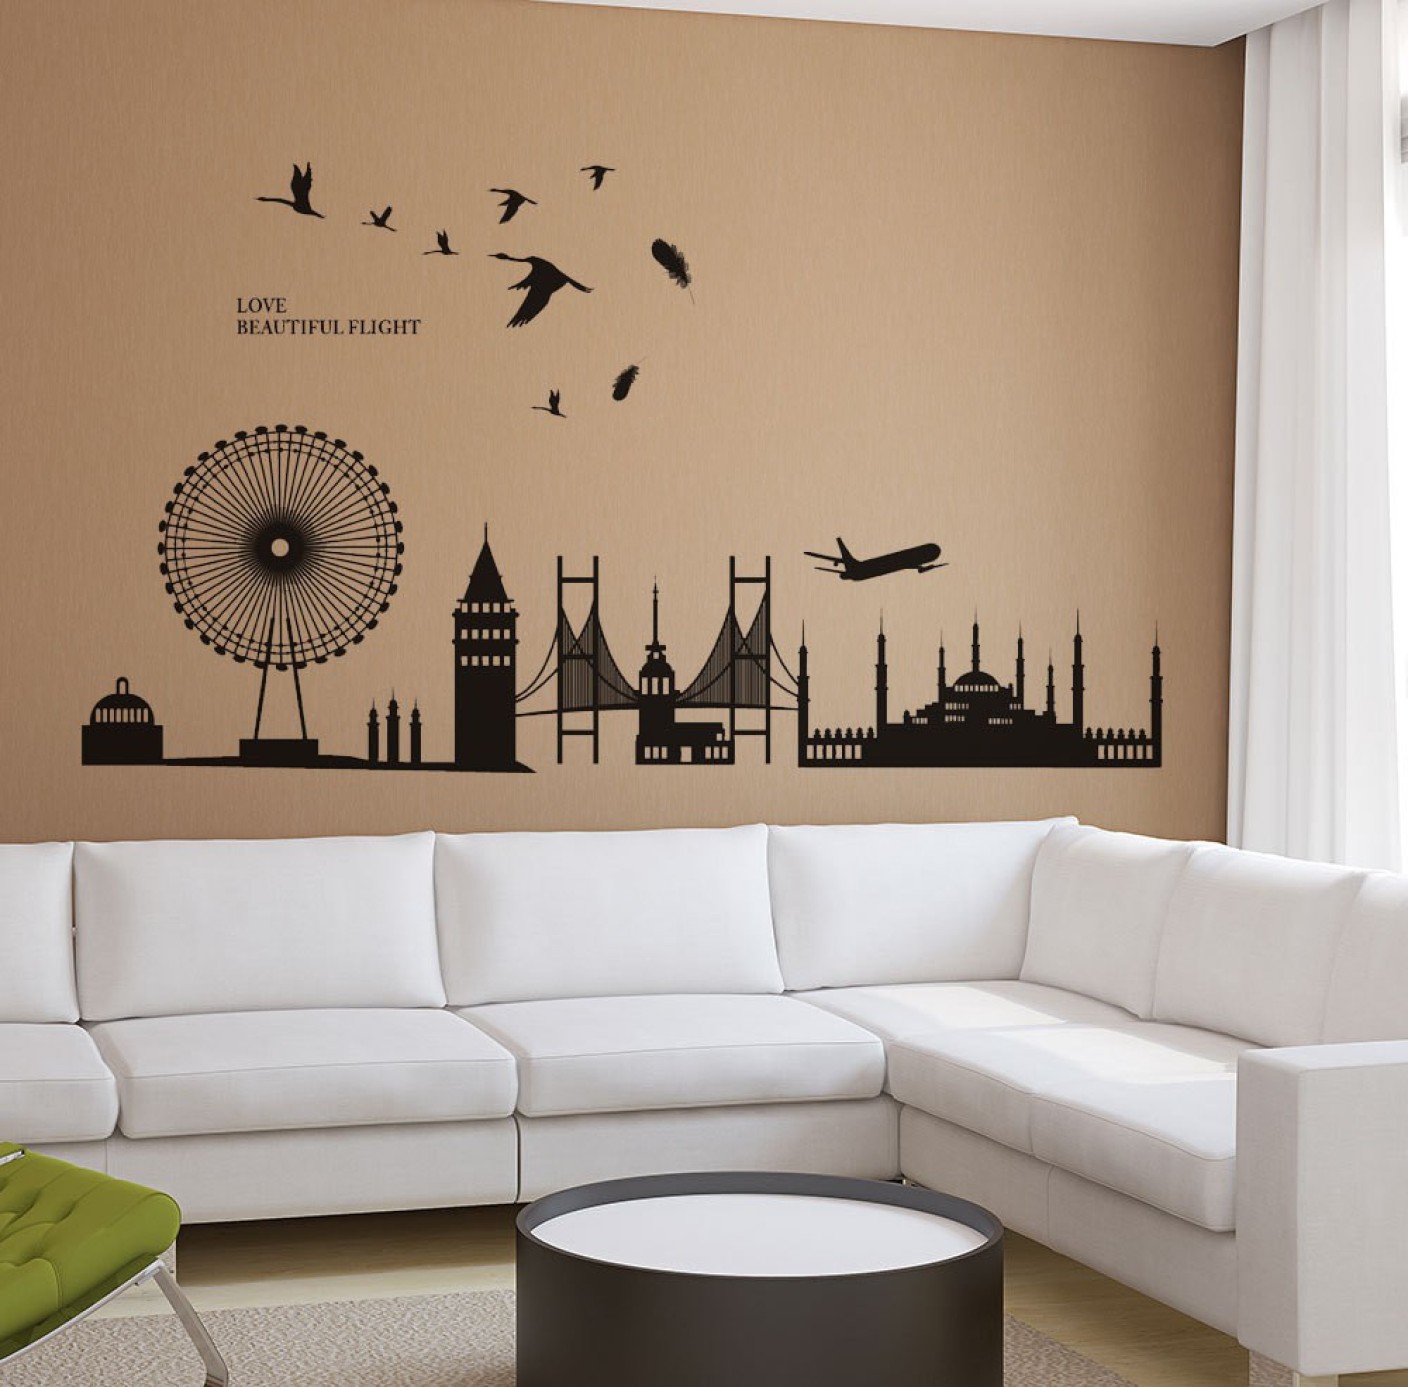 New Way Decals Wall Sticker  Scenic Wallpaper  Price  in 